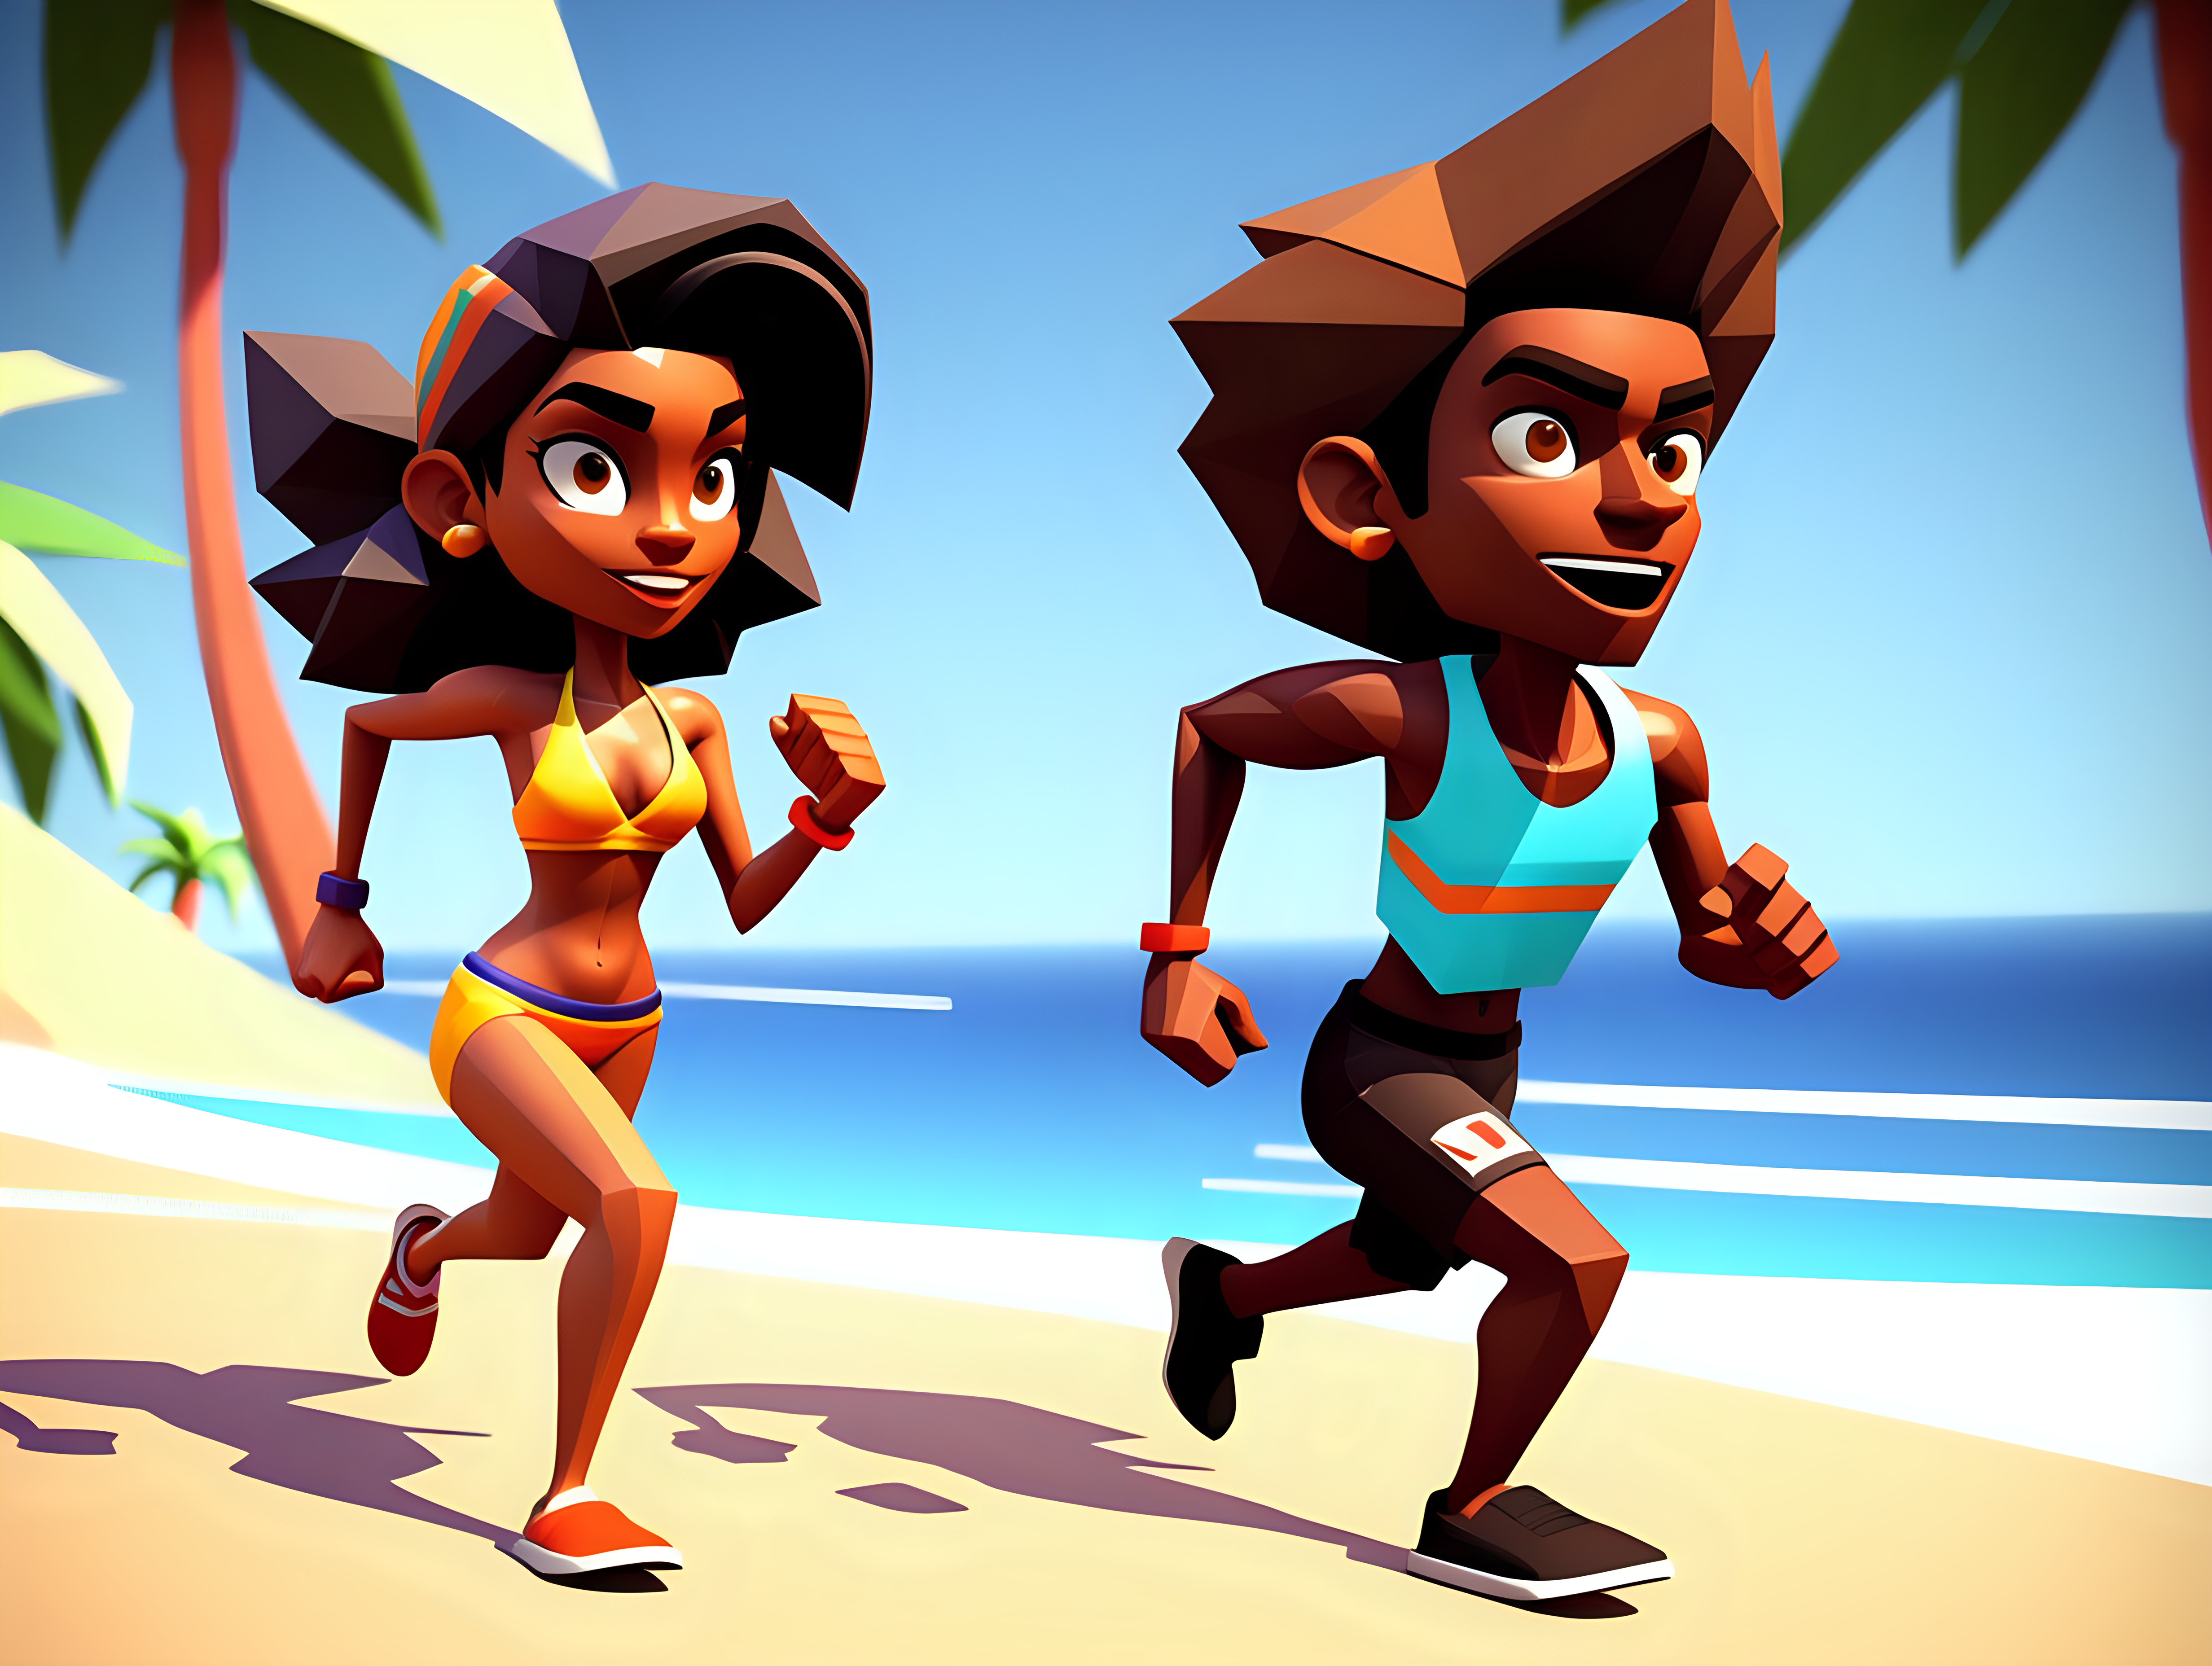 Generate an in-game screenshot for a PS1-era urban tropical beach run racing game with low-poly graphics. Feature a predominantly black and Hispanic cast of characters, wearing vibrant beach outfits. The characters should exude a lively and energetic atmosphere as they compete in a thrilling beach run race. Infuse the scene with an urban tropical vibe, emphasizing the sandy beach, palm trees, and ocean backdrop.

Incorporate smooth low-poly graphics reminiscent of the PS1 era, capturing the essence of classic racing games. The soundtrack is influenced by upbeat Afrobeats, setting the tone for the vibrant and dynamic gameplay. Introduce a mascot character, adding an extra layer of charm and excitement to the race. Ensure the screenshot encapsulates the speed and joy of a beach run racing game, with characters showcasing their unique running styles and personalities. Embrace the fusion of diverse cultural influences, creating a visually appealing and lively atmosphere reminiscent of classic PS1-era racing games.